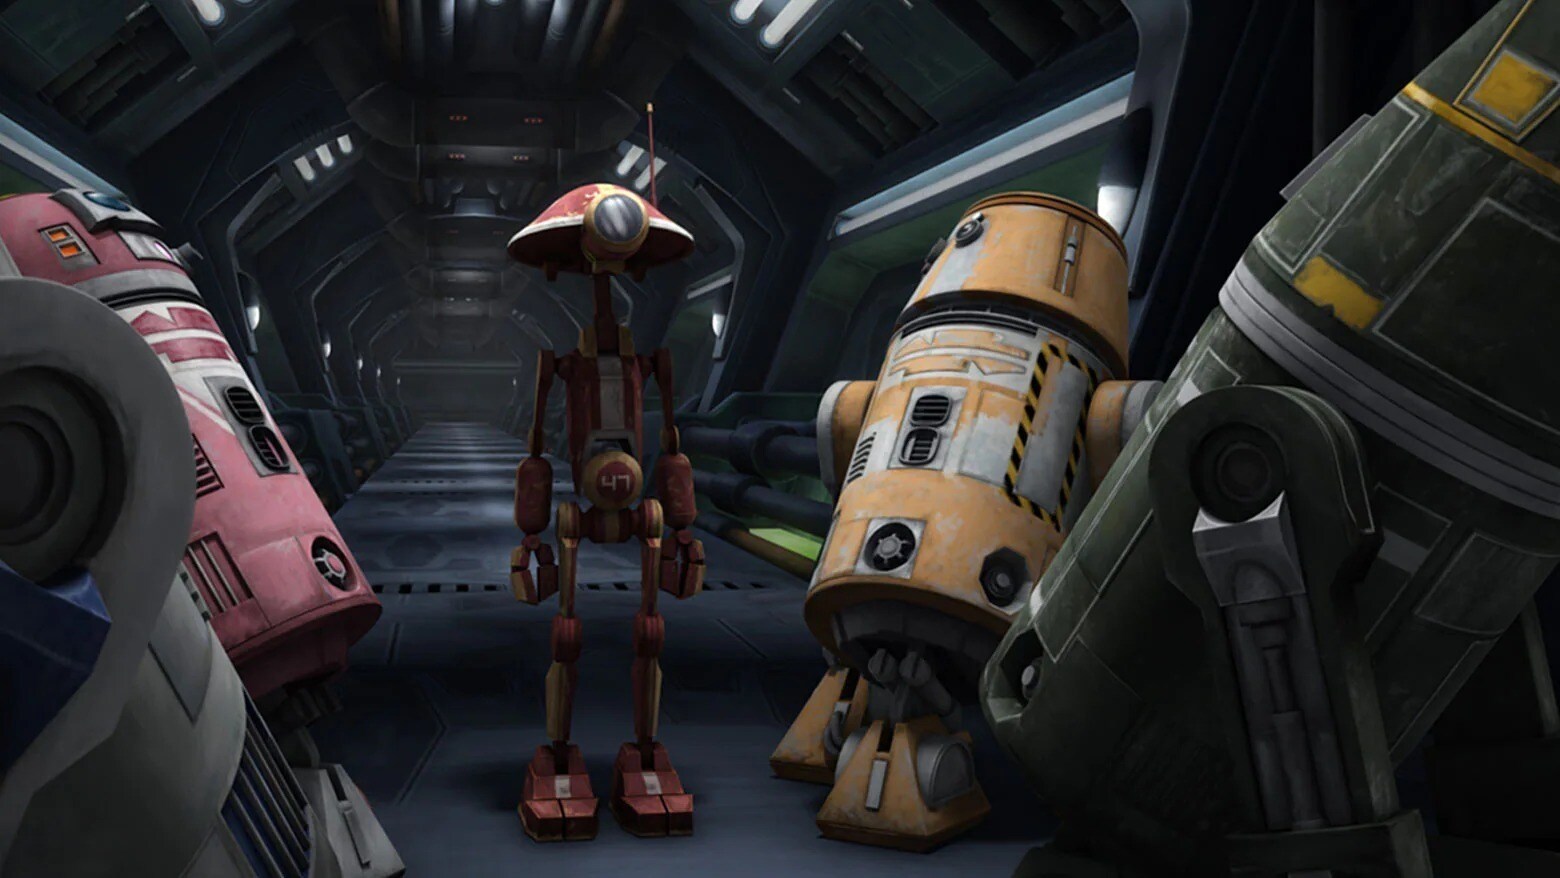 Two droids from The Clone Wars